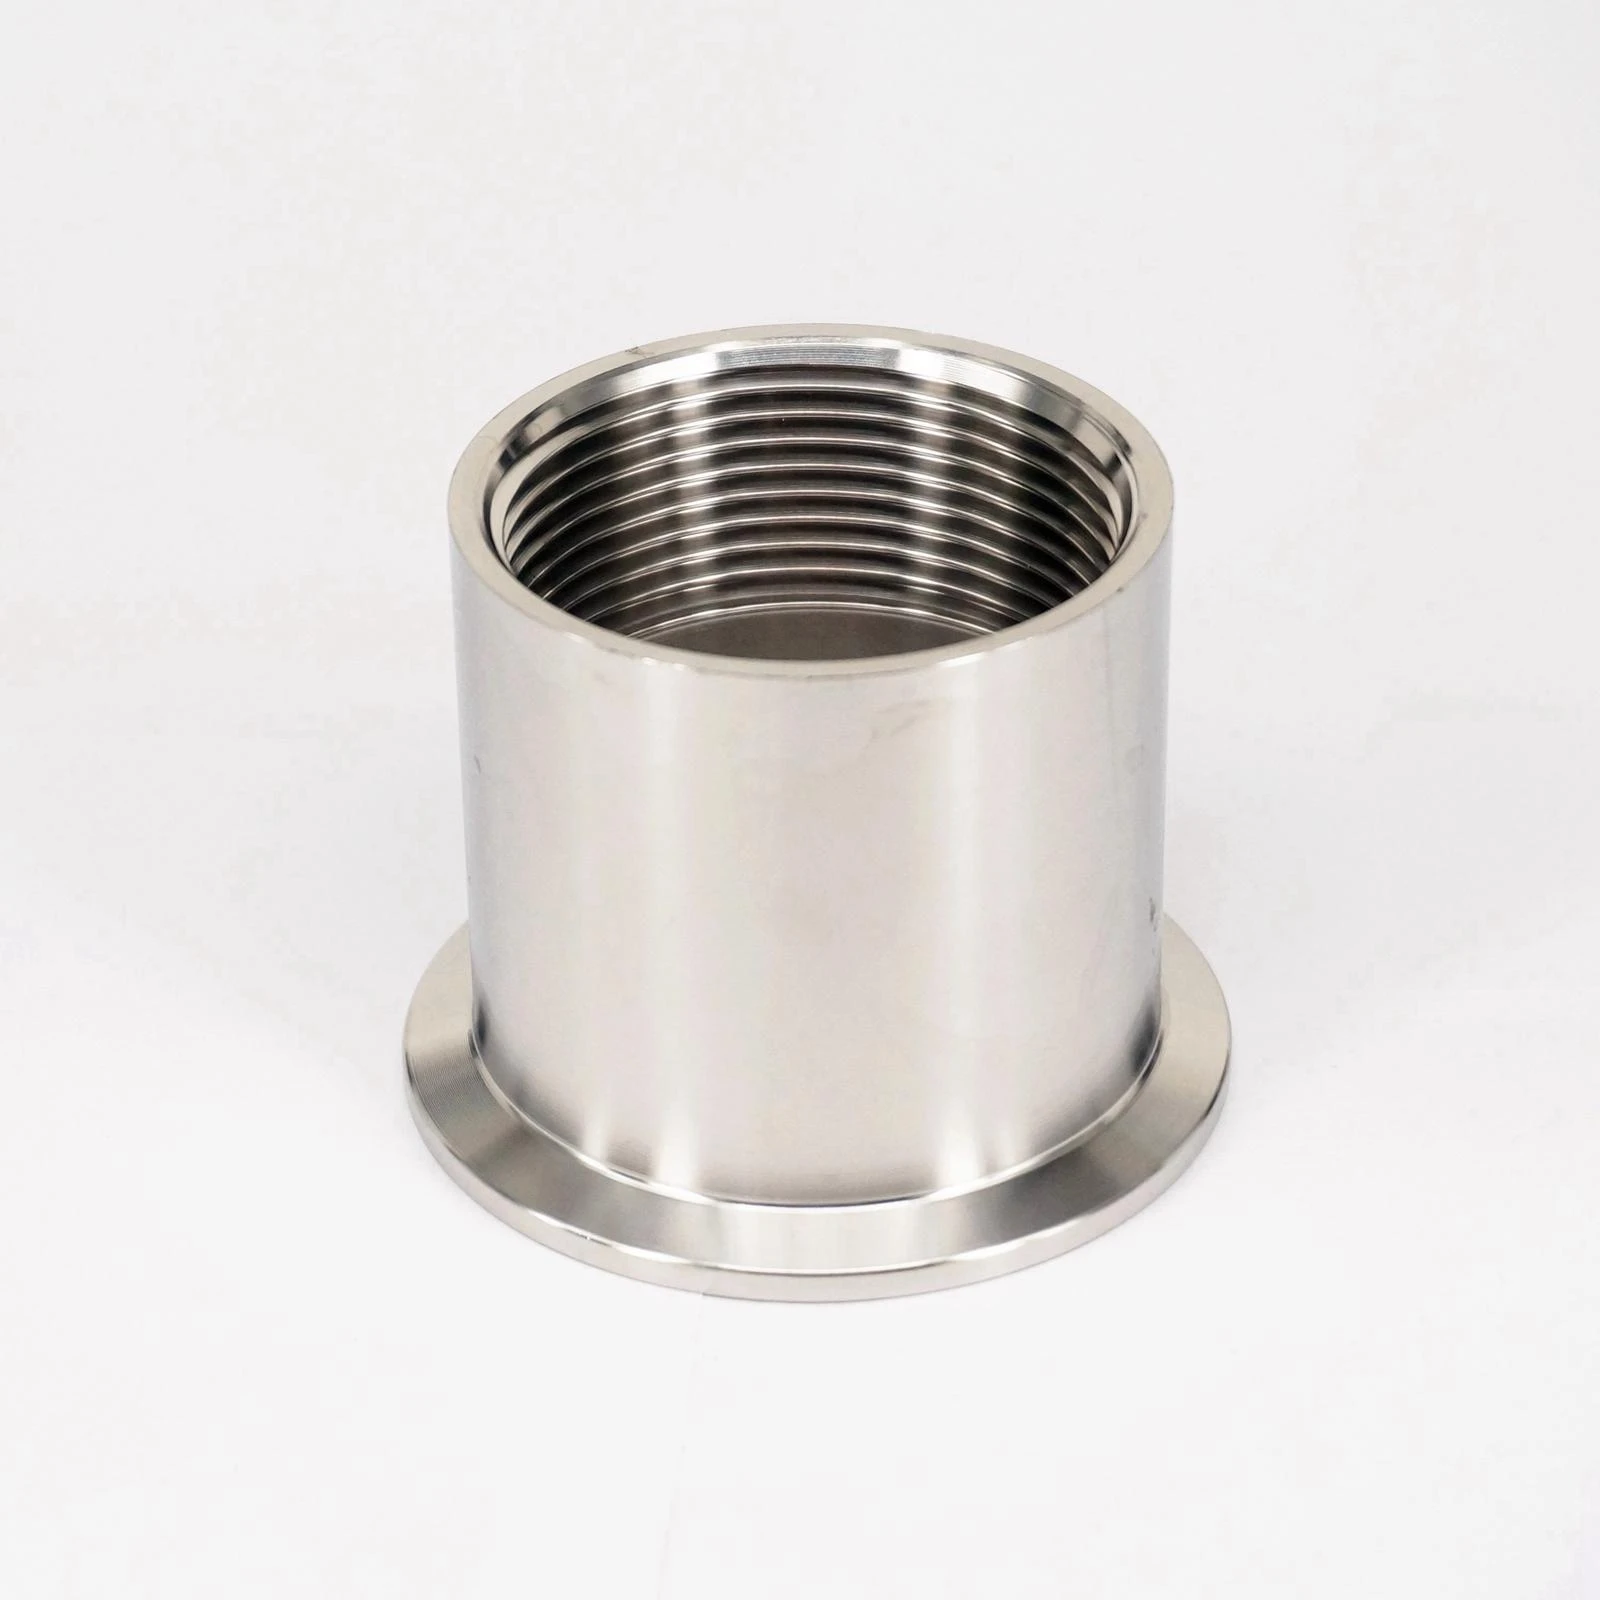 2 BSPT Female x 2.5 Tri Clamp 304 Stainless Steel Sanitary Ferrule Clamp Pipe Fitting Connector 